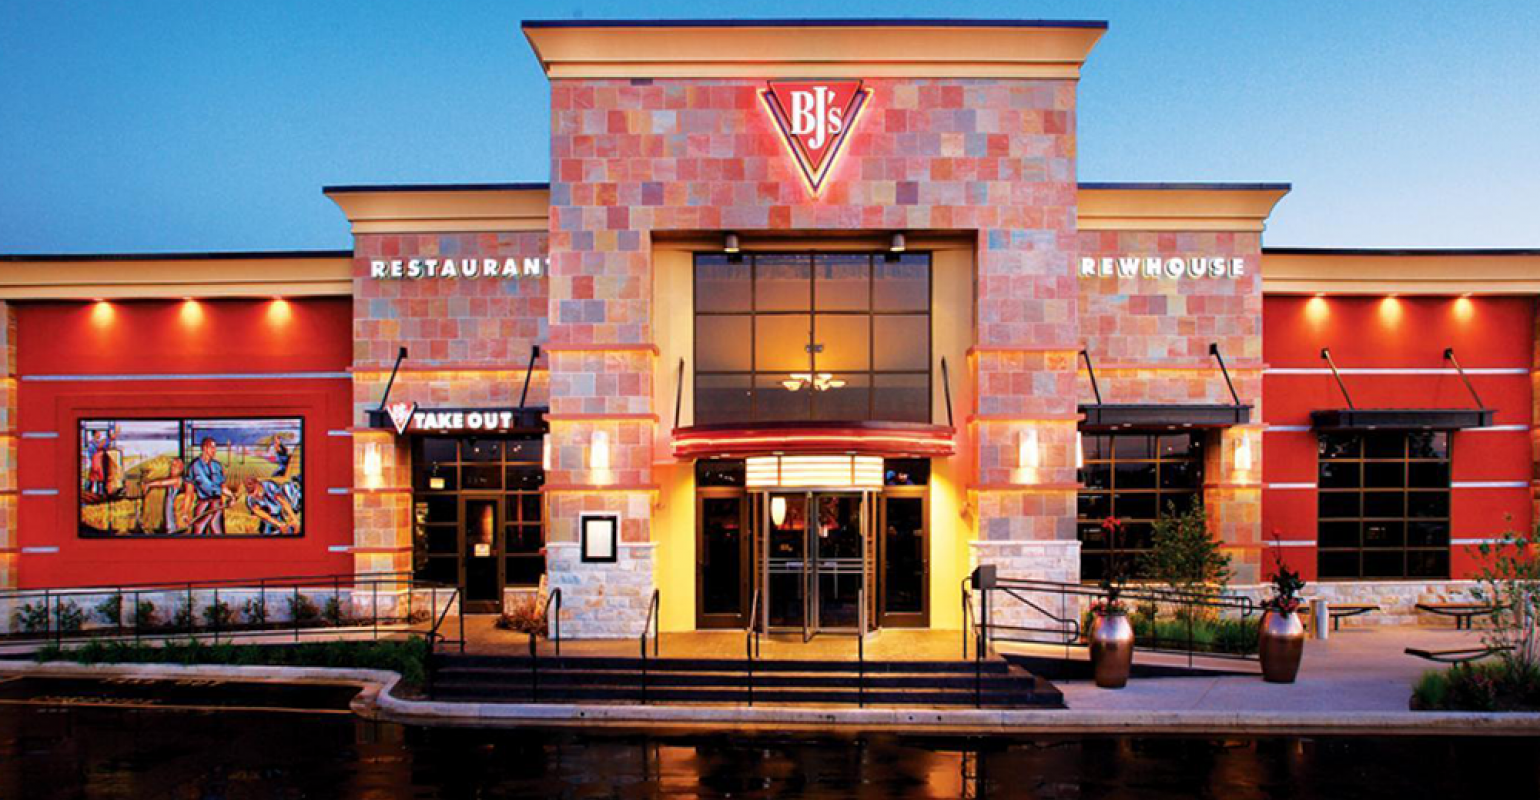 BJ’s closes dining rooms that had reopened in coronavirus easing